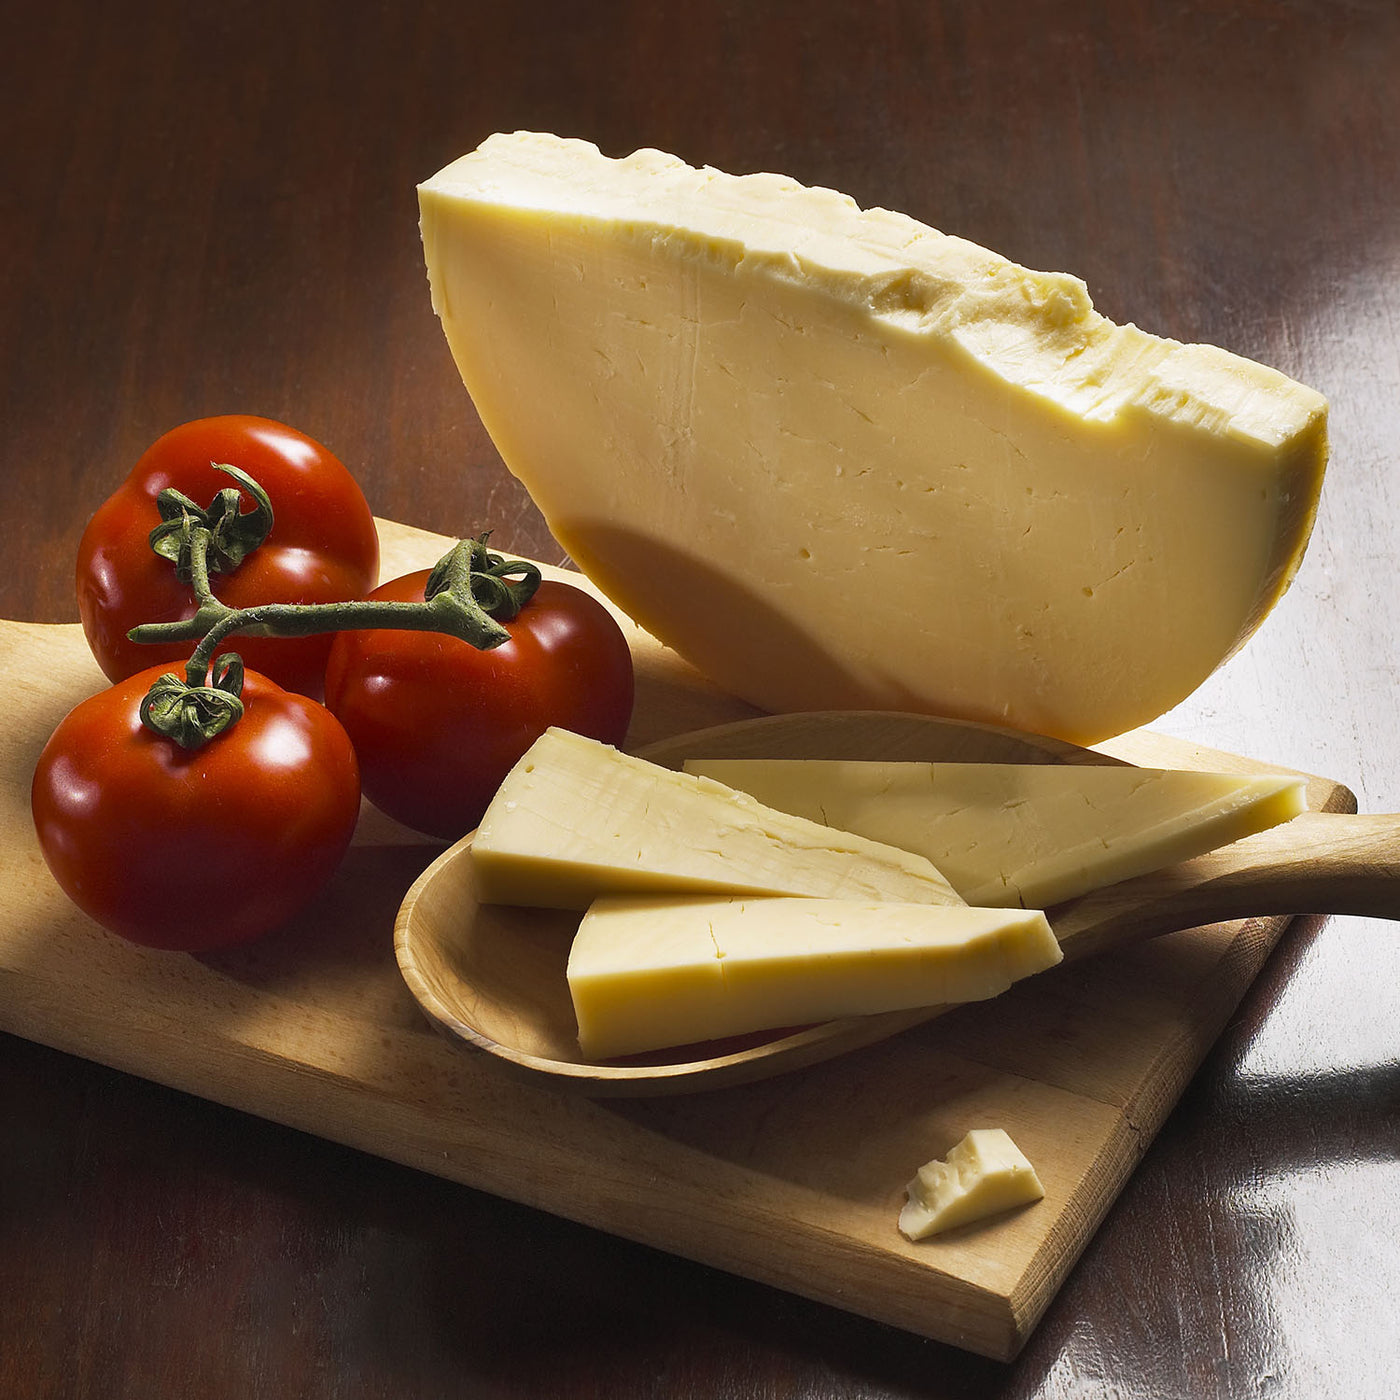 Provolone DOP – Dolceterra Italian Within US Store